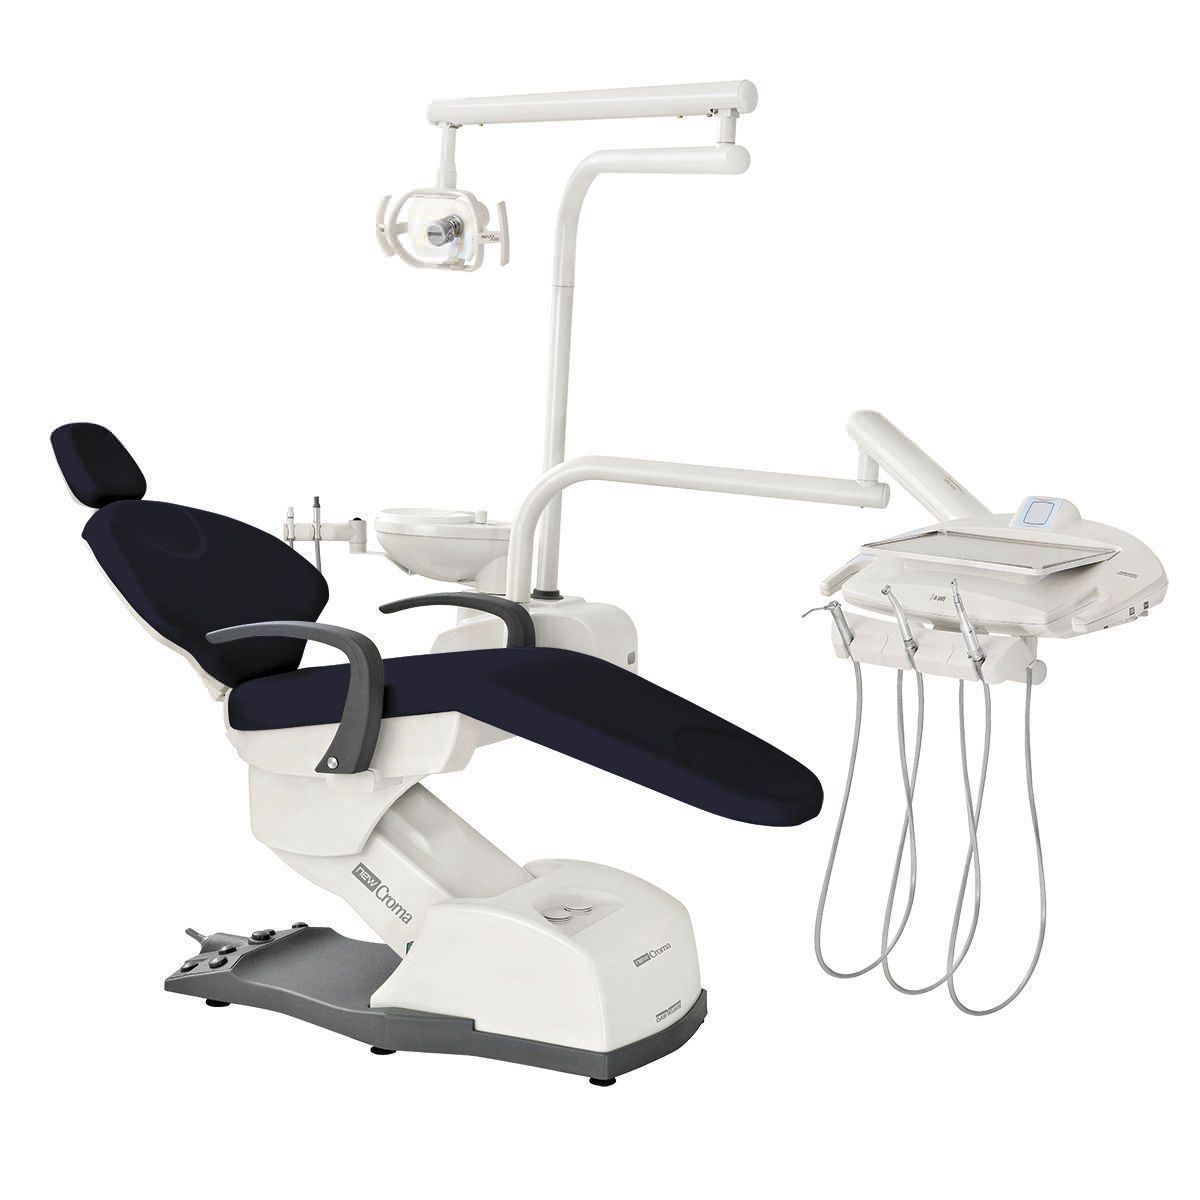 Dental treatment unit with delivery system / with lamp CROMA TECHNO 2197 DABI ATLANTE